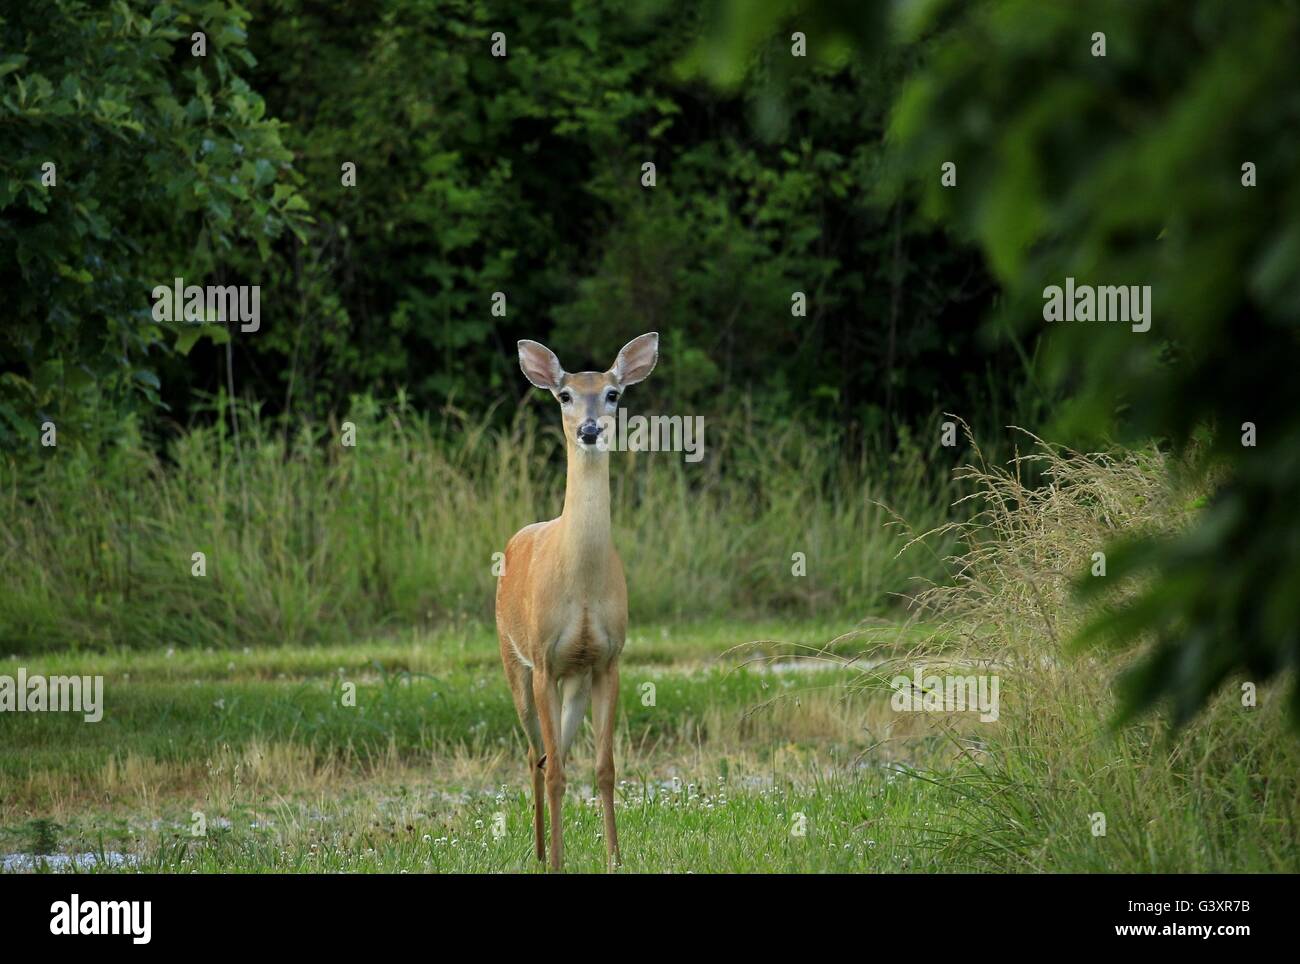 Whitetail deer looking straight at the photographer Stock Photo